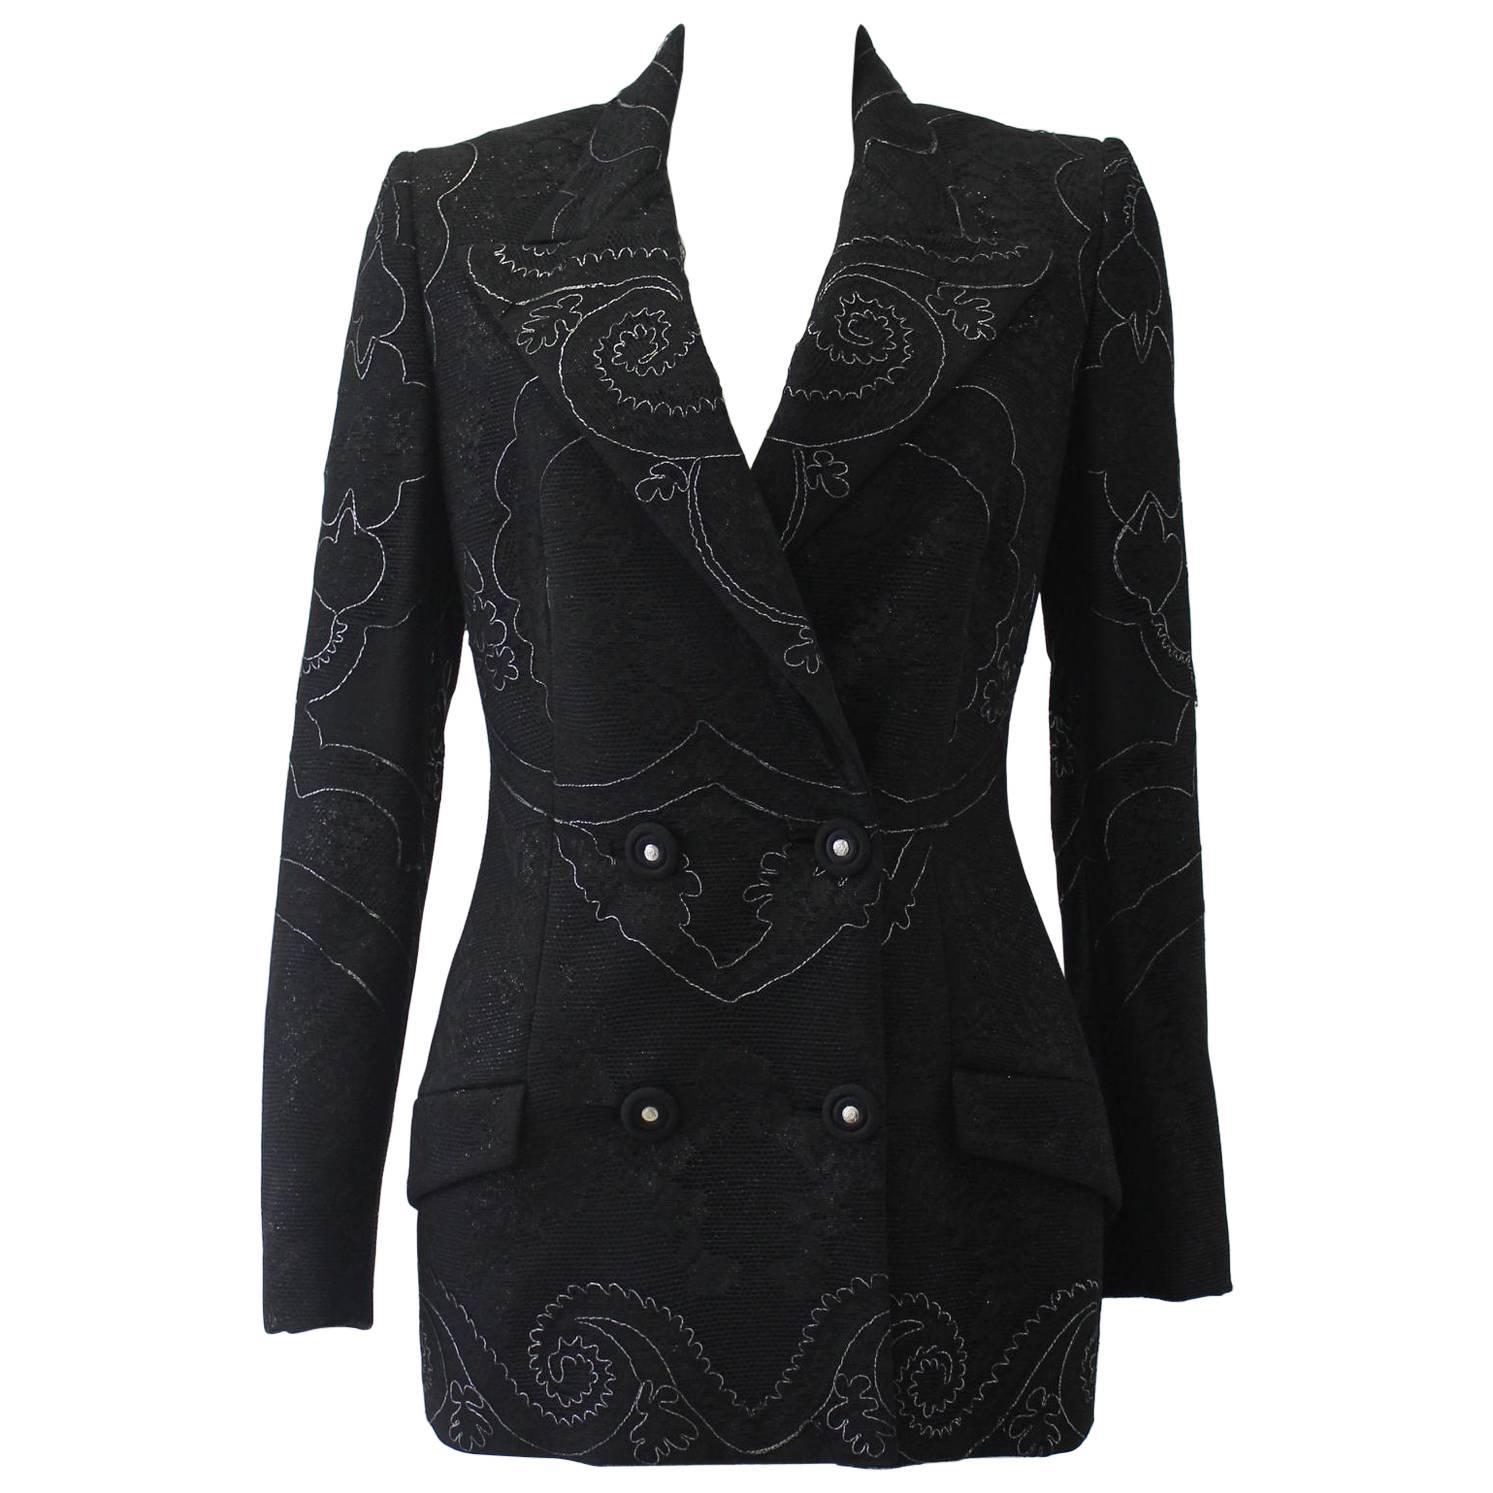 Gianni Versace Couture Lace Metallic Embroidered Jacket Fall 1996 For Sale